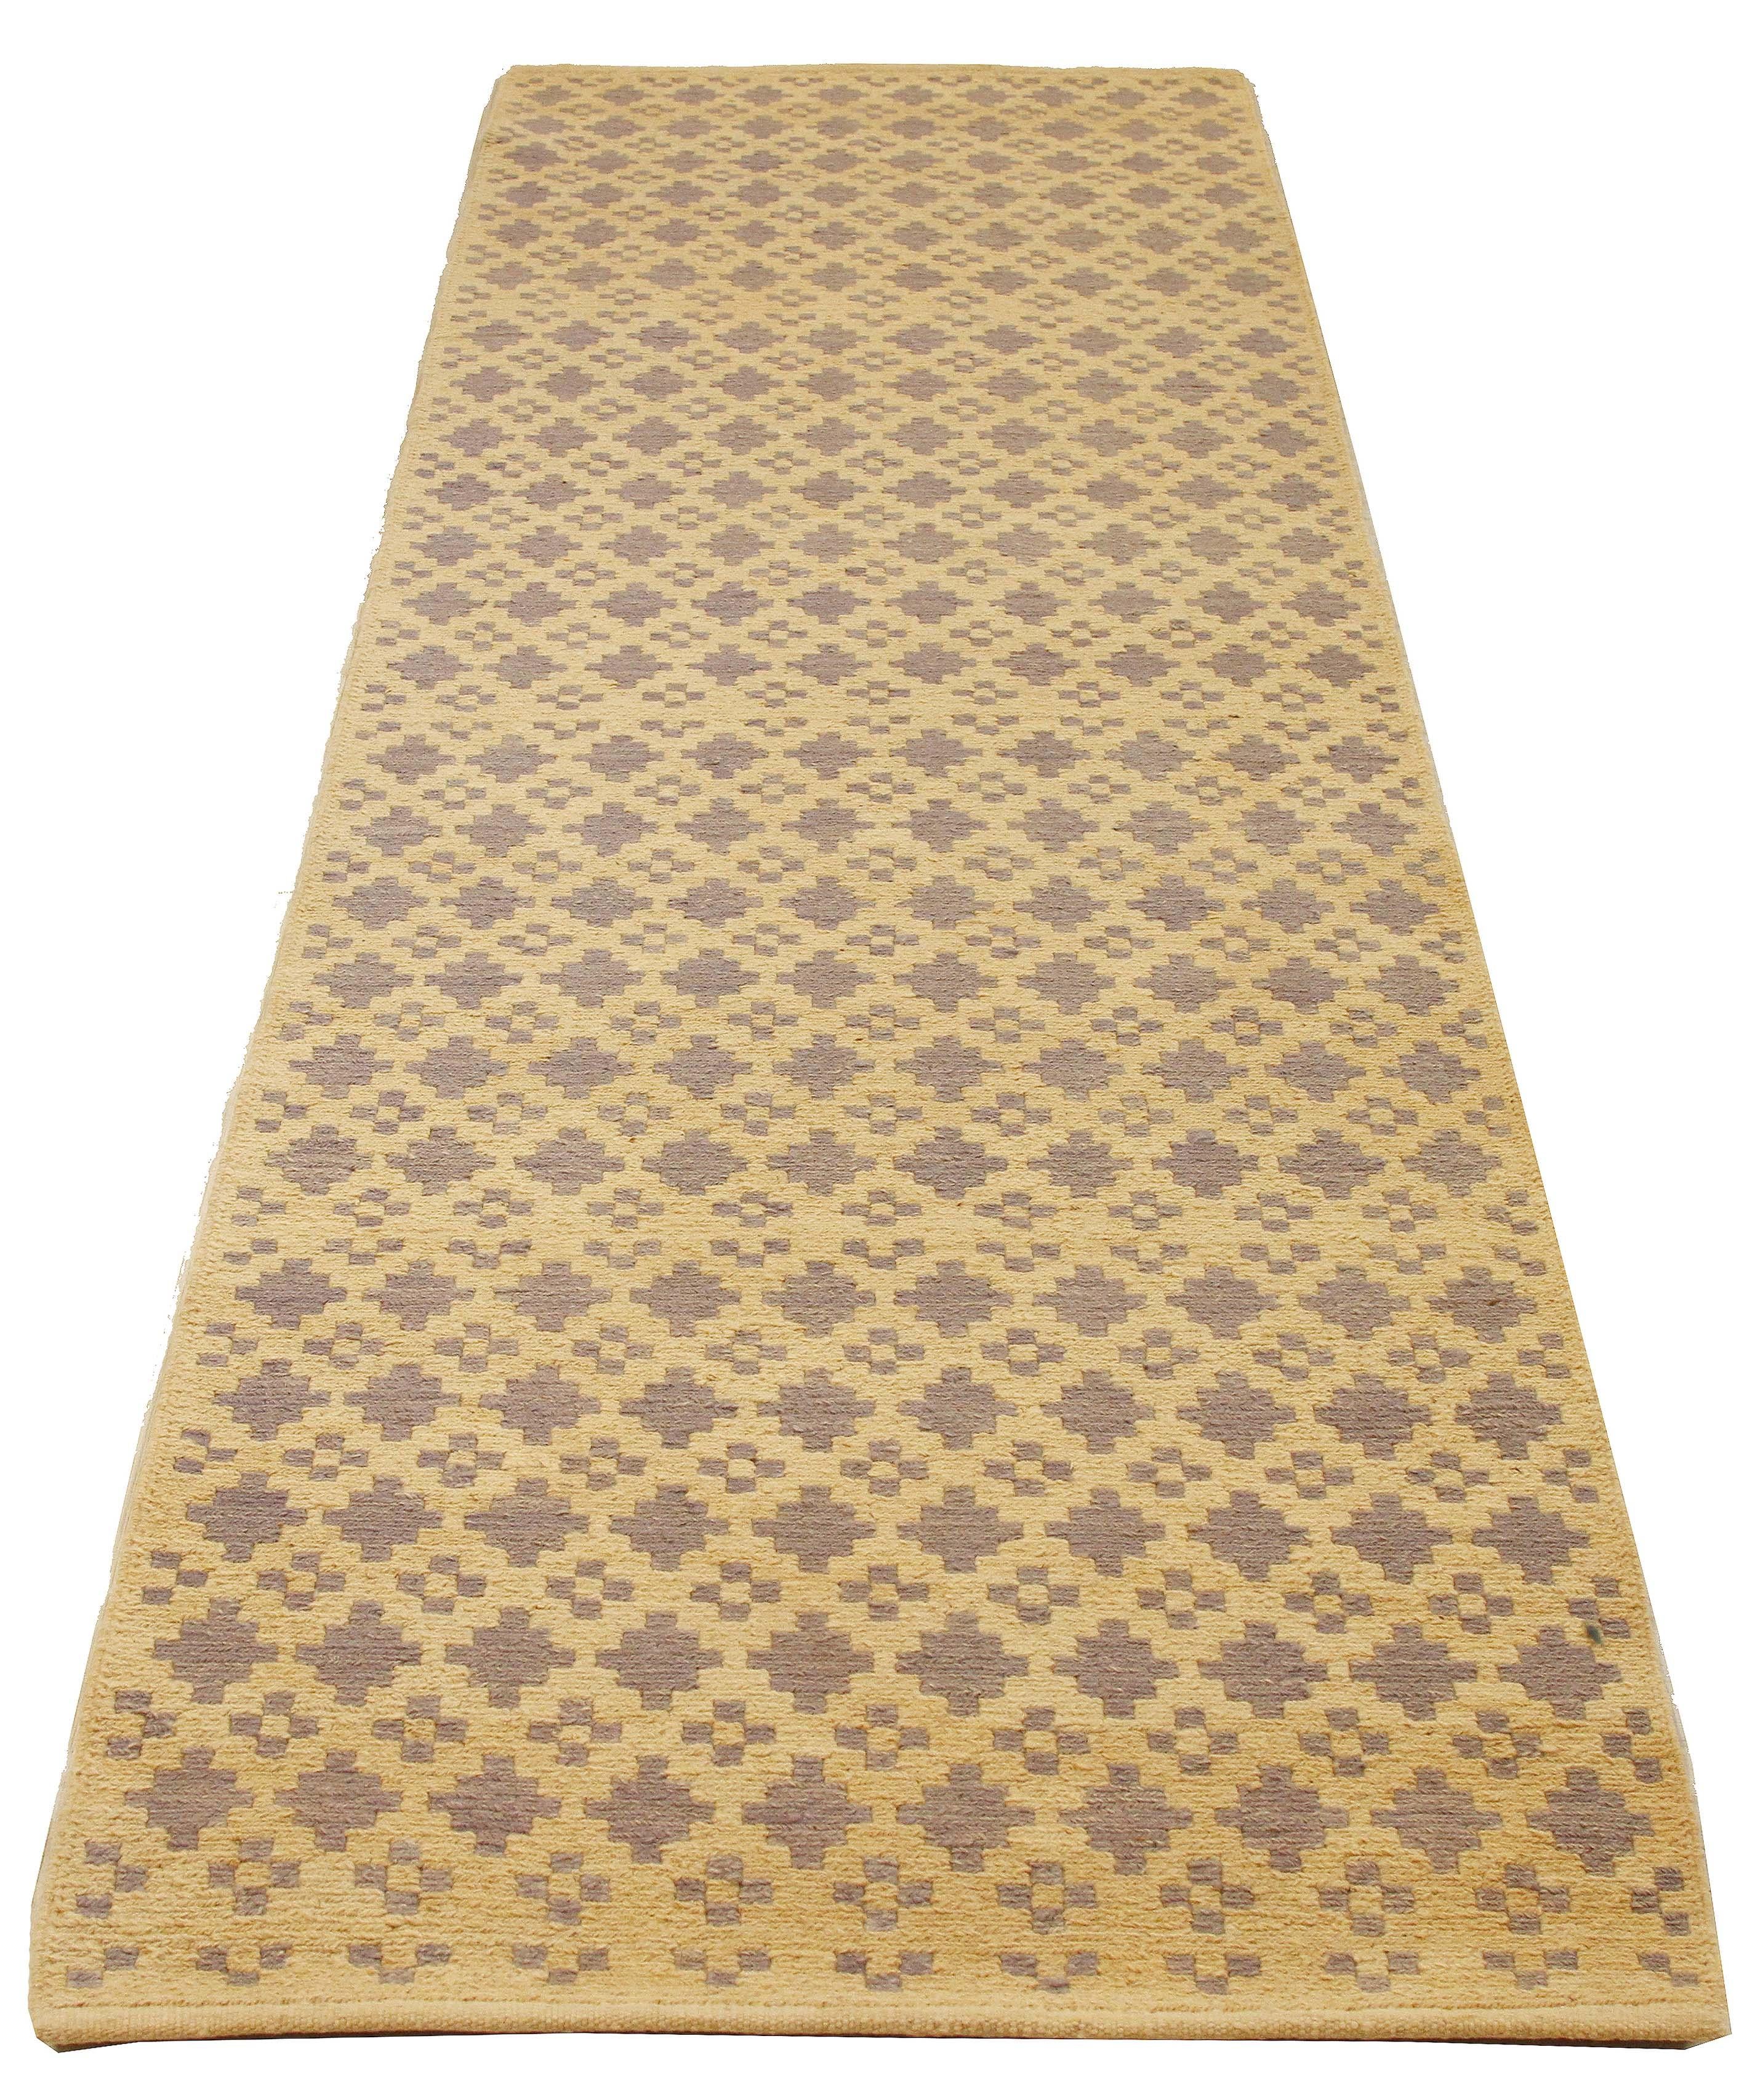 Turkish rug handwoven from the finest sheep’s wool and colored with all-natural vegetable dyes that are safe for humans and pets. It’s a traditional Kilim flat-weave design featuring geometric patterns of gray on a plush beige field. It’s a stunning